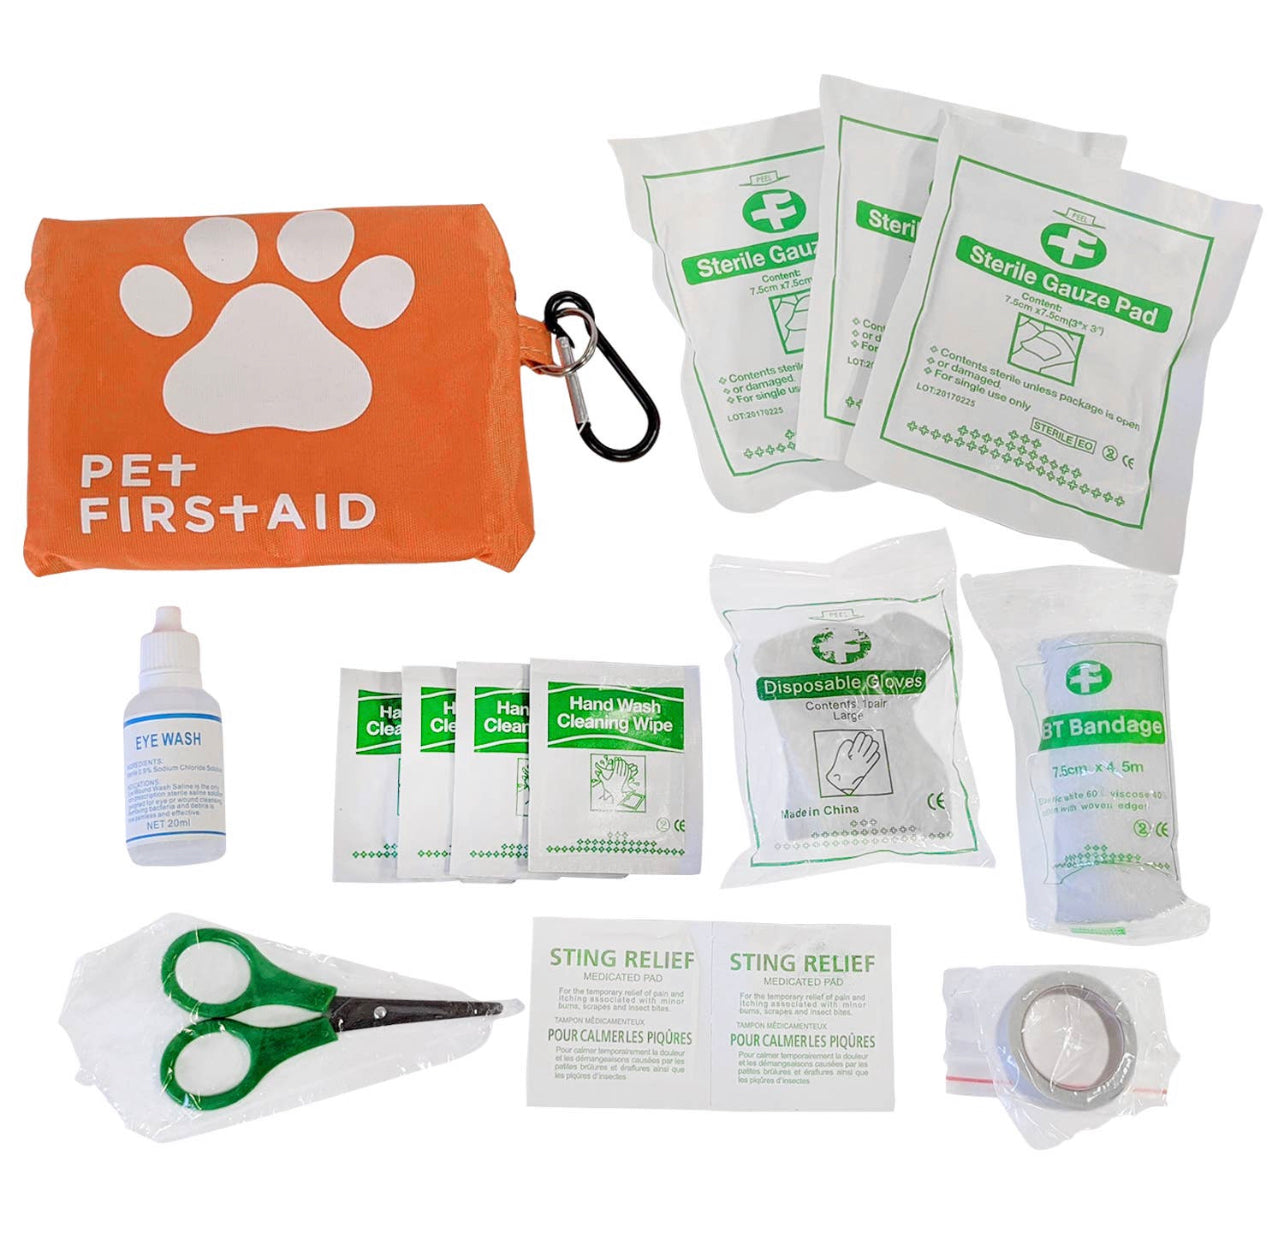 Pet First aid